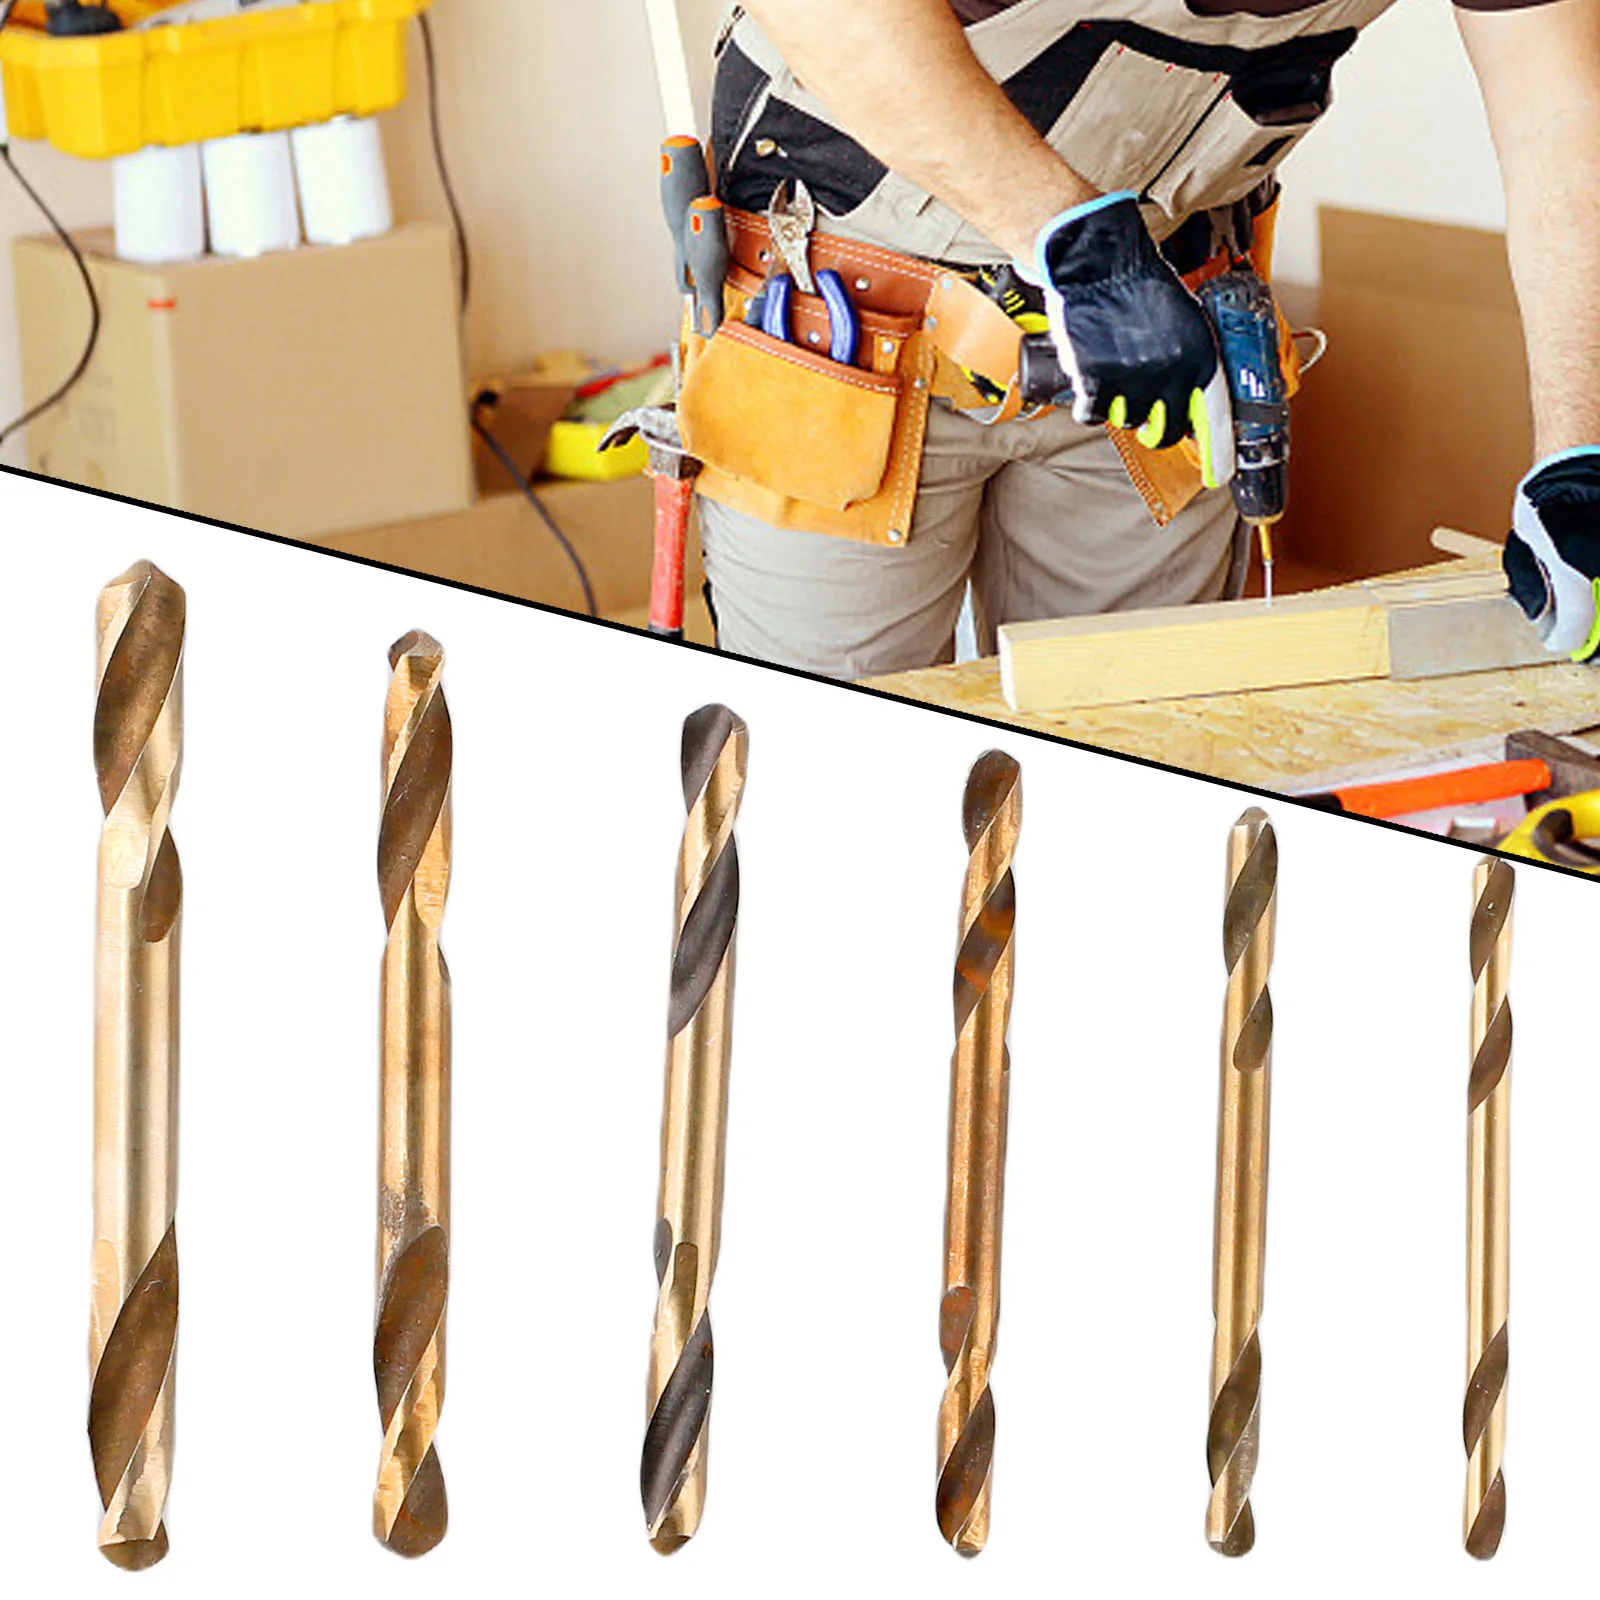 Auger Drill Bits All Purpose HSS Drill Bits for Metal Stainless Steel and Wood Set of 6 Double Headed Auger Bits